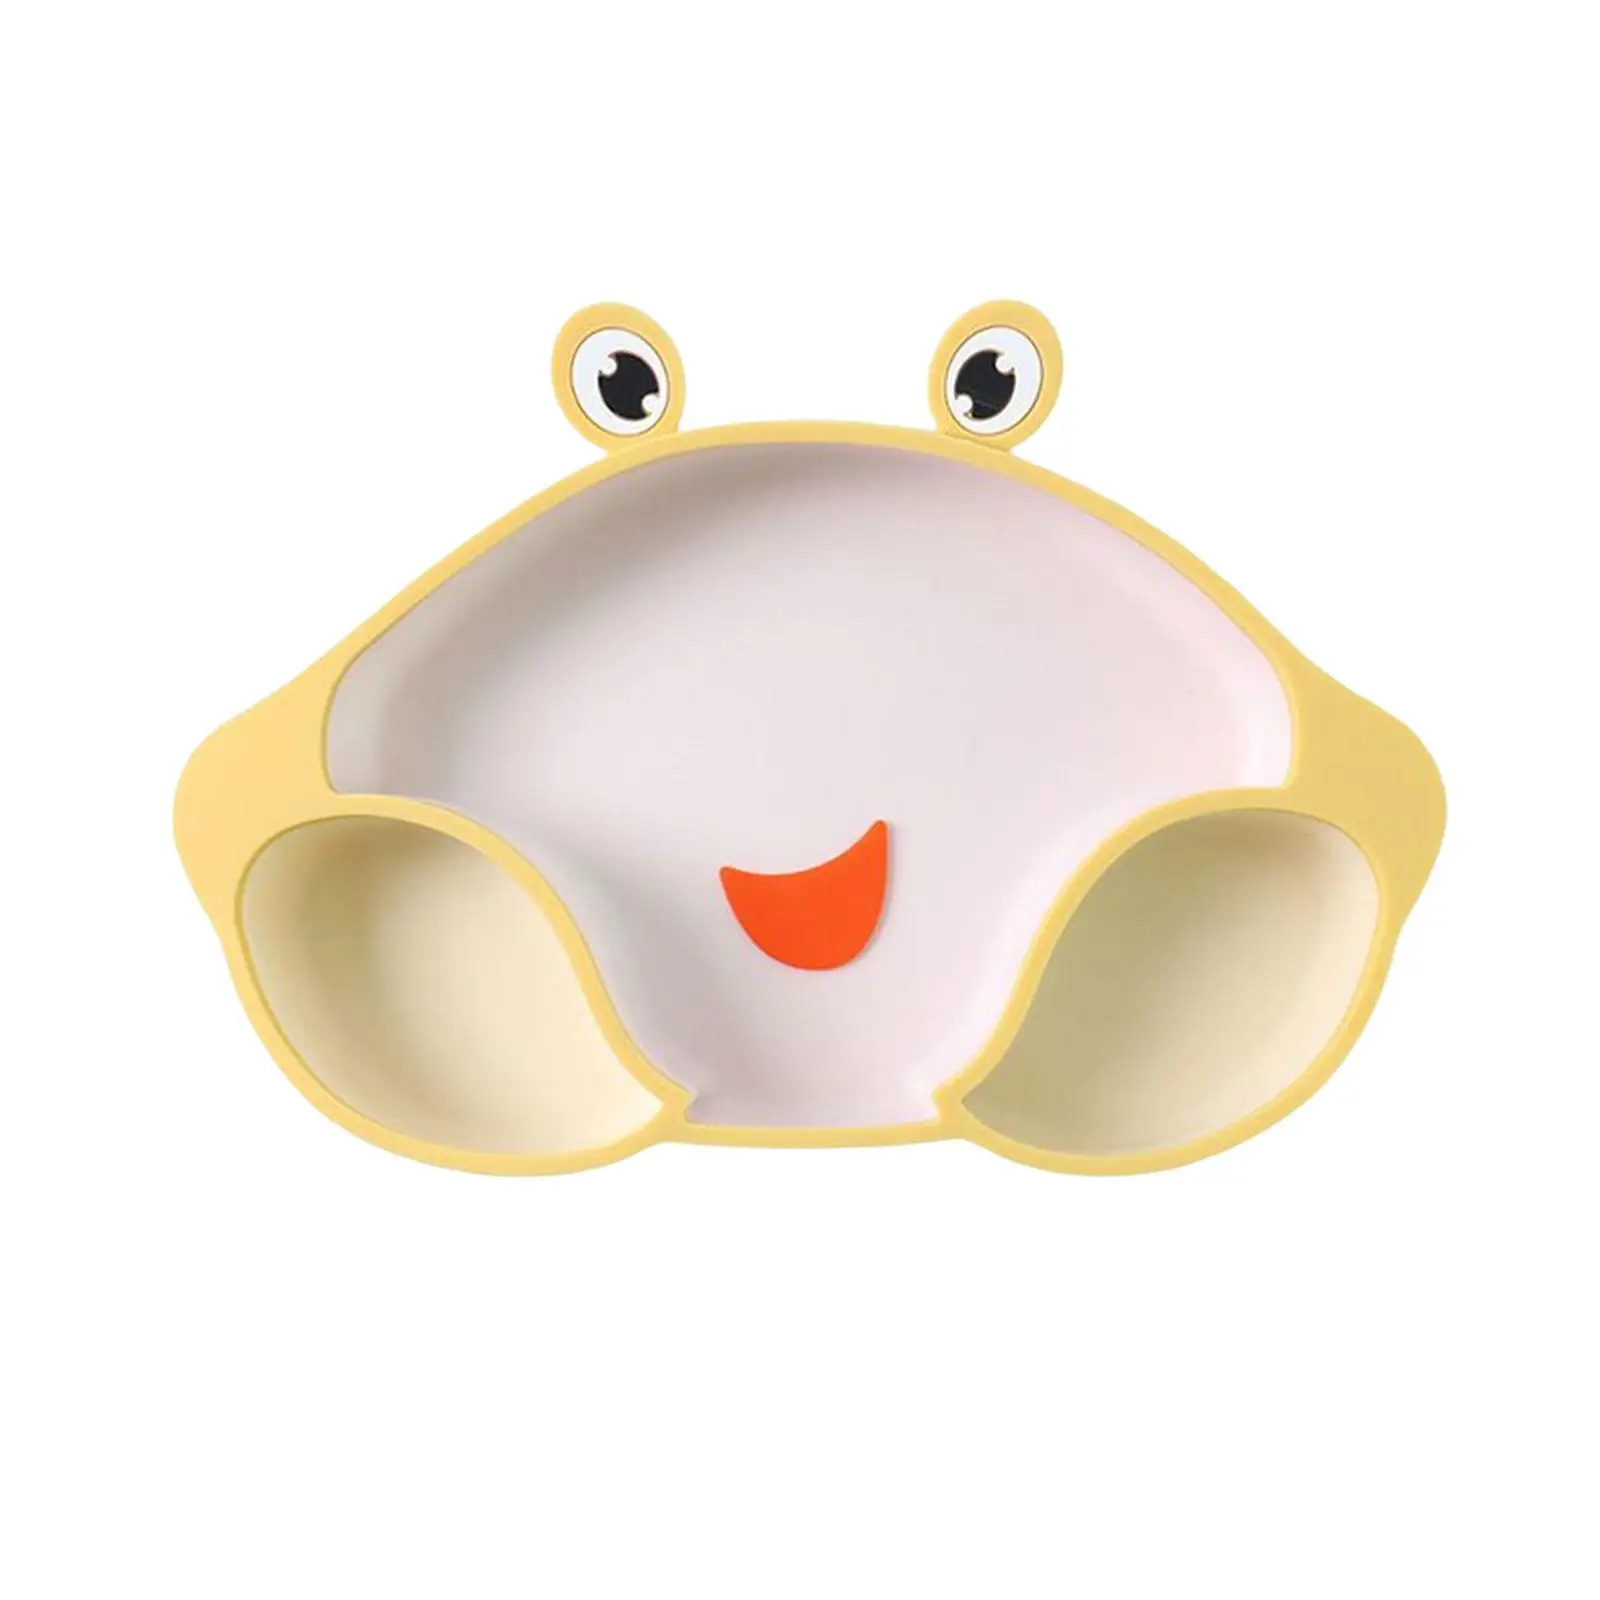 Non Slip Silicone Suction Divided Plate Dinnerware Food Bowl Dish Placemat Baby Plate with Suction for Children Toddlers Kids